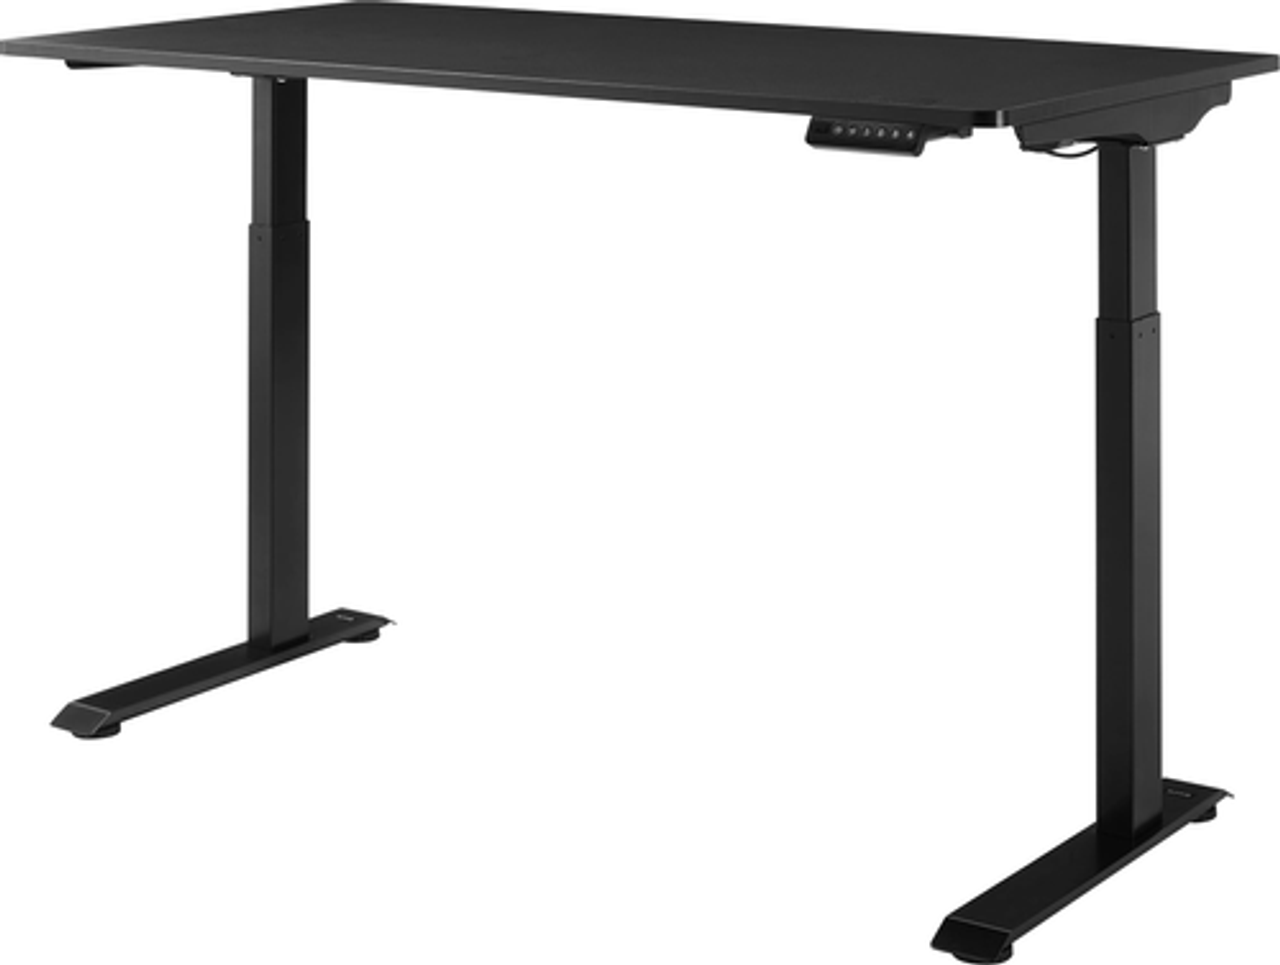 Insignia™ - Adjustable Standing Desk with Electronic Controls - 55.1" wide - Black